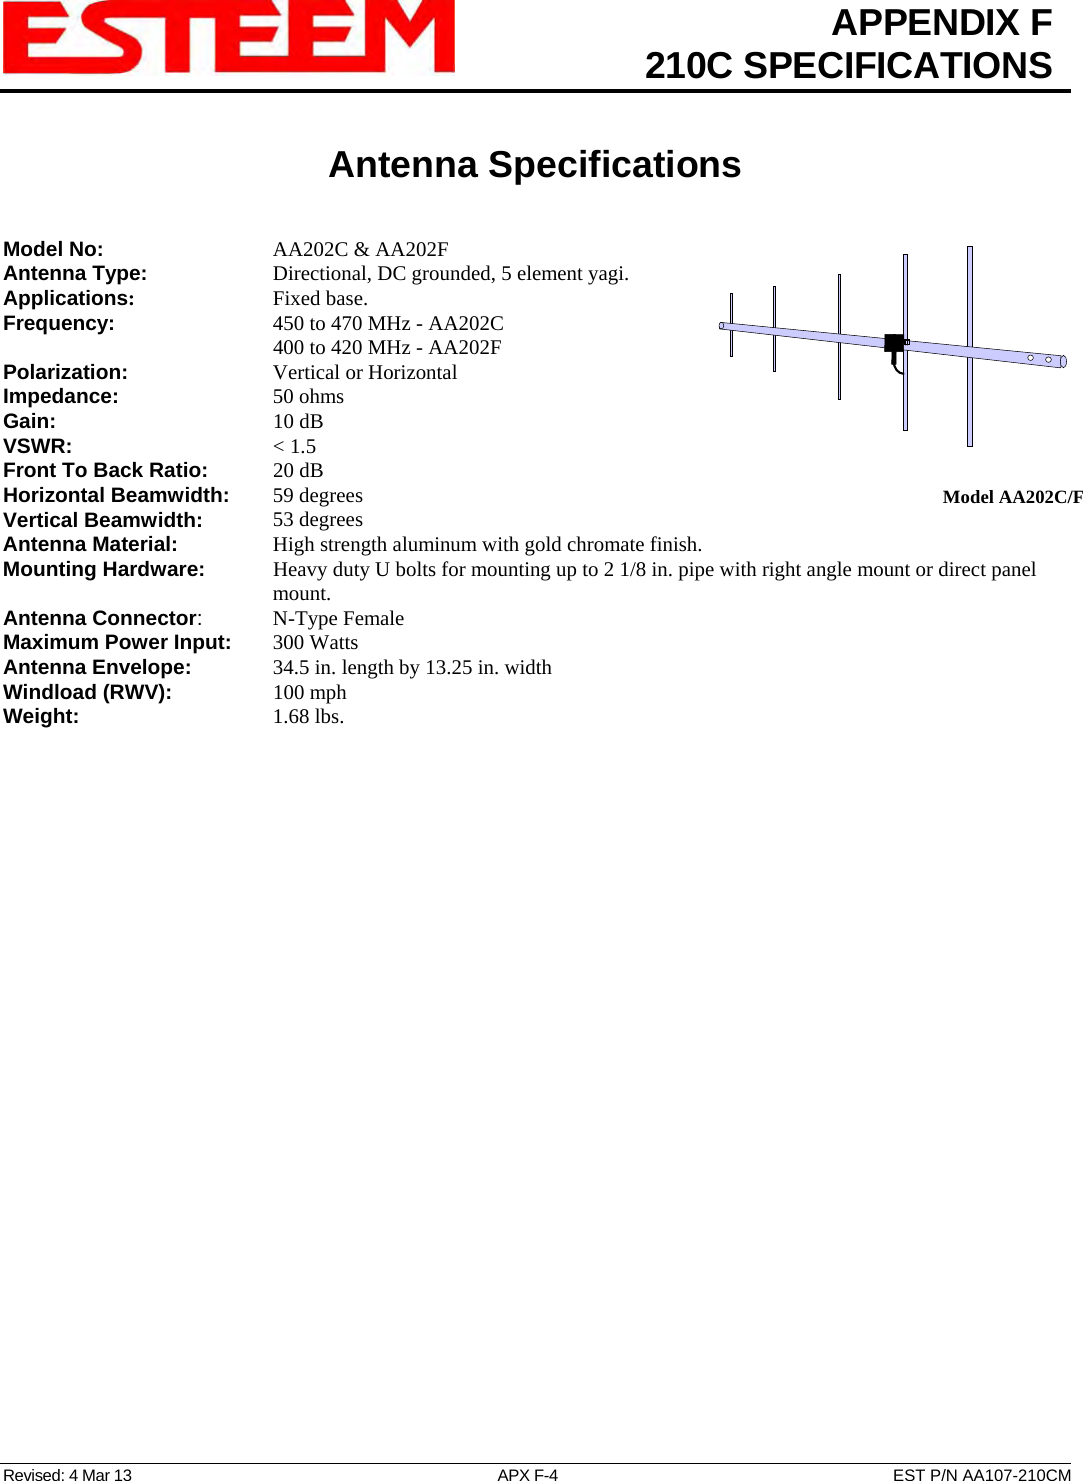  APPENDIX F  210C SPECIFICATIONS   Antenna Specifications   Revised: 4 Mar 13  APX F-4  EST P/N AA107-210CM  Model AA202C/FModel No:    AA202C &amp; AA202F Antenna Type:     Directional, DC grounded, 5 element yagi.  Applications:    Fixed base. Frequency:    450 to 470 MHz - AA202C       400 to 420 MHz - AA202F  Polarization:    Vertical or Horizontal Impedance:    50 ohms Gain:     10 dB VSWR:      &lt; 1.5  Front To Back Ratio:   20 dB Horizontal Beamwidth:  59 degrees Vertical Beamwidth:     53 degrees Antenna Material:     High strength aluminum with gold chromate finish.  Mounting Hardware:      Heavy duty U bolts for mounting up to 2 1/8 in. pipe with right angle mount or direct panel mount. Antenna Connector:   N-Type Female Maximum Power Input: 300 Watts Antenna Envelope:   34.5 in. length by 13.25 in. width Windload (RWV):   100 mph Weight:     1.68 lbs.        